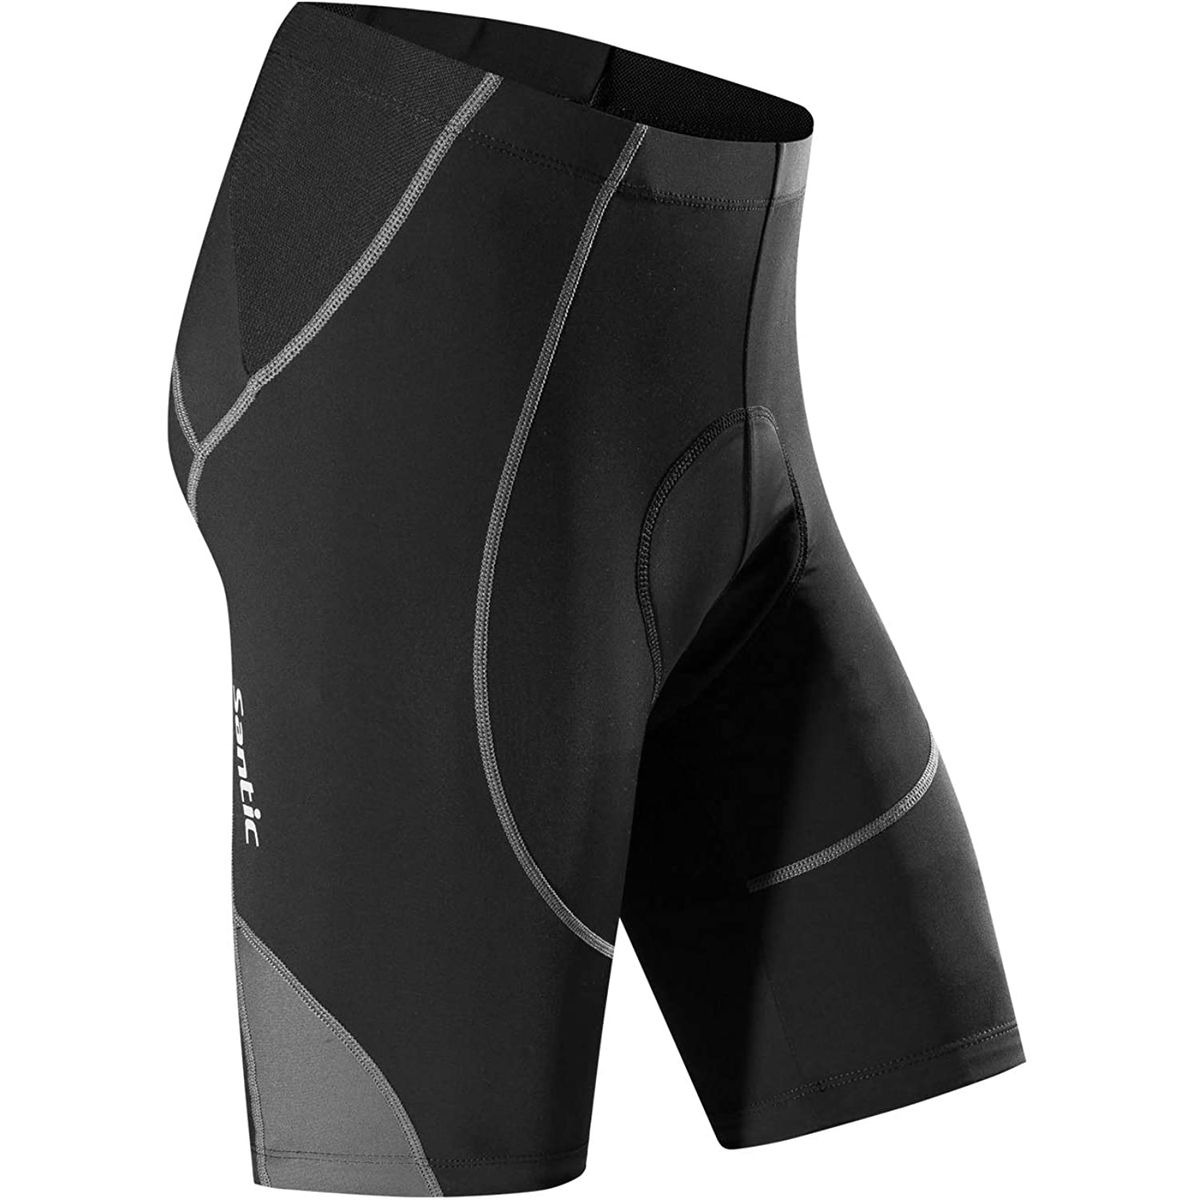 Best Men's Cycling Shorts On Amazon